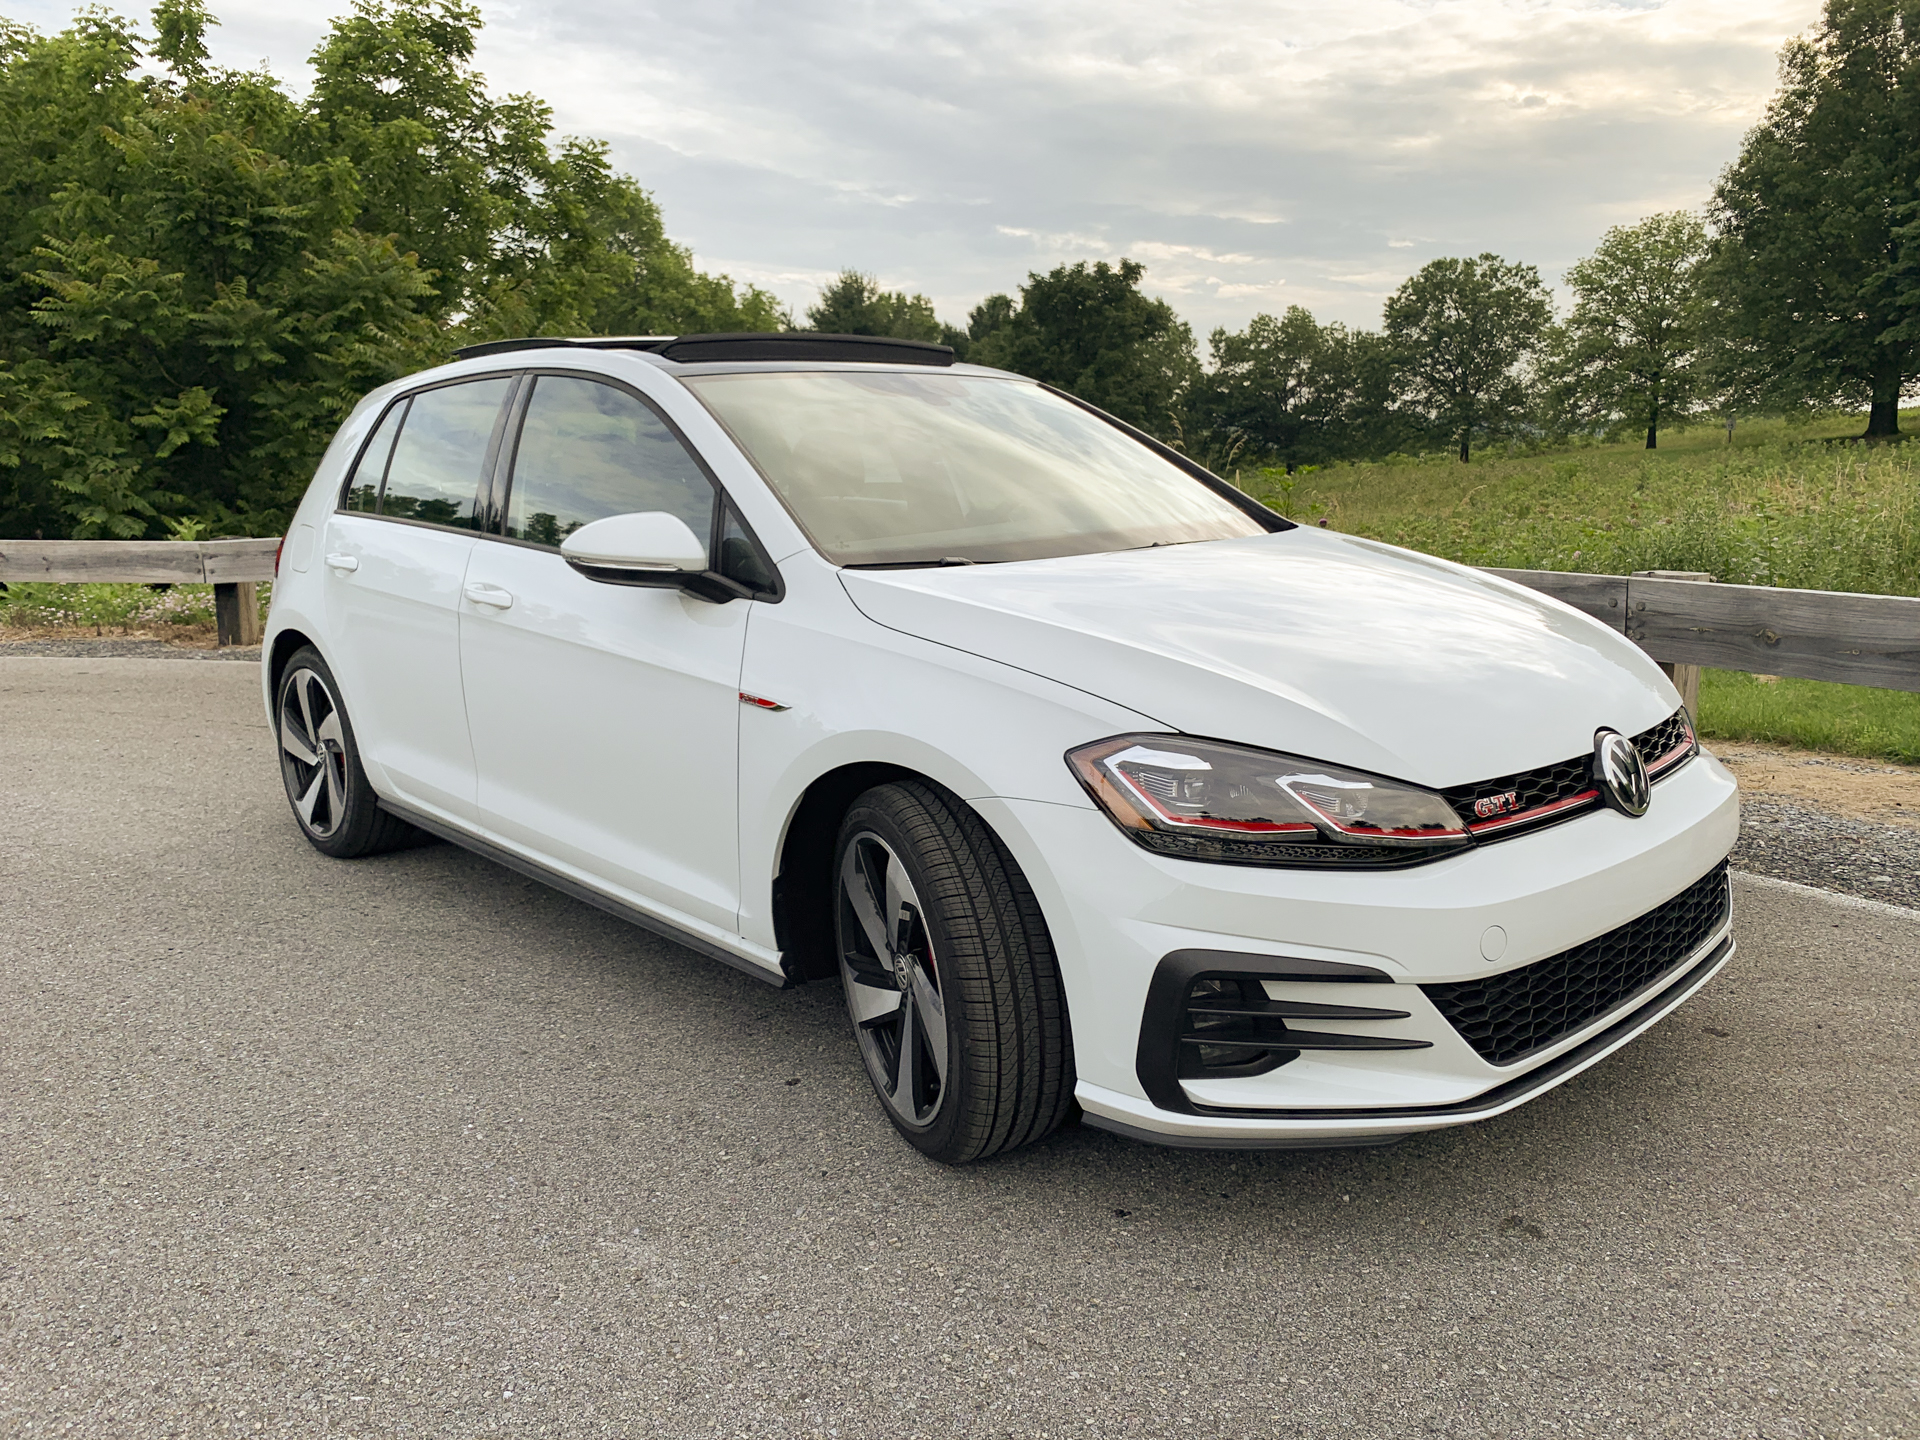 2019 Volkswagen Golf GTI Review: More Power And More Tech | Digital Trends